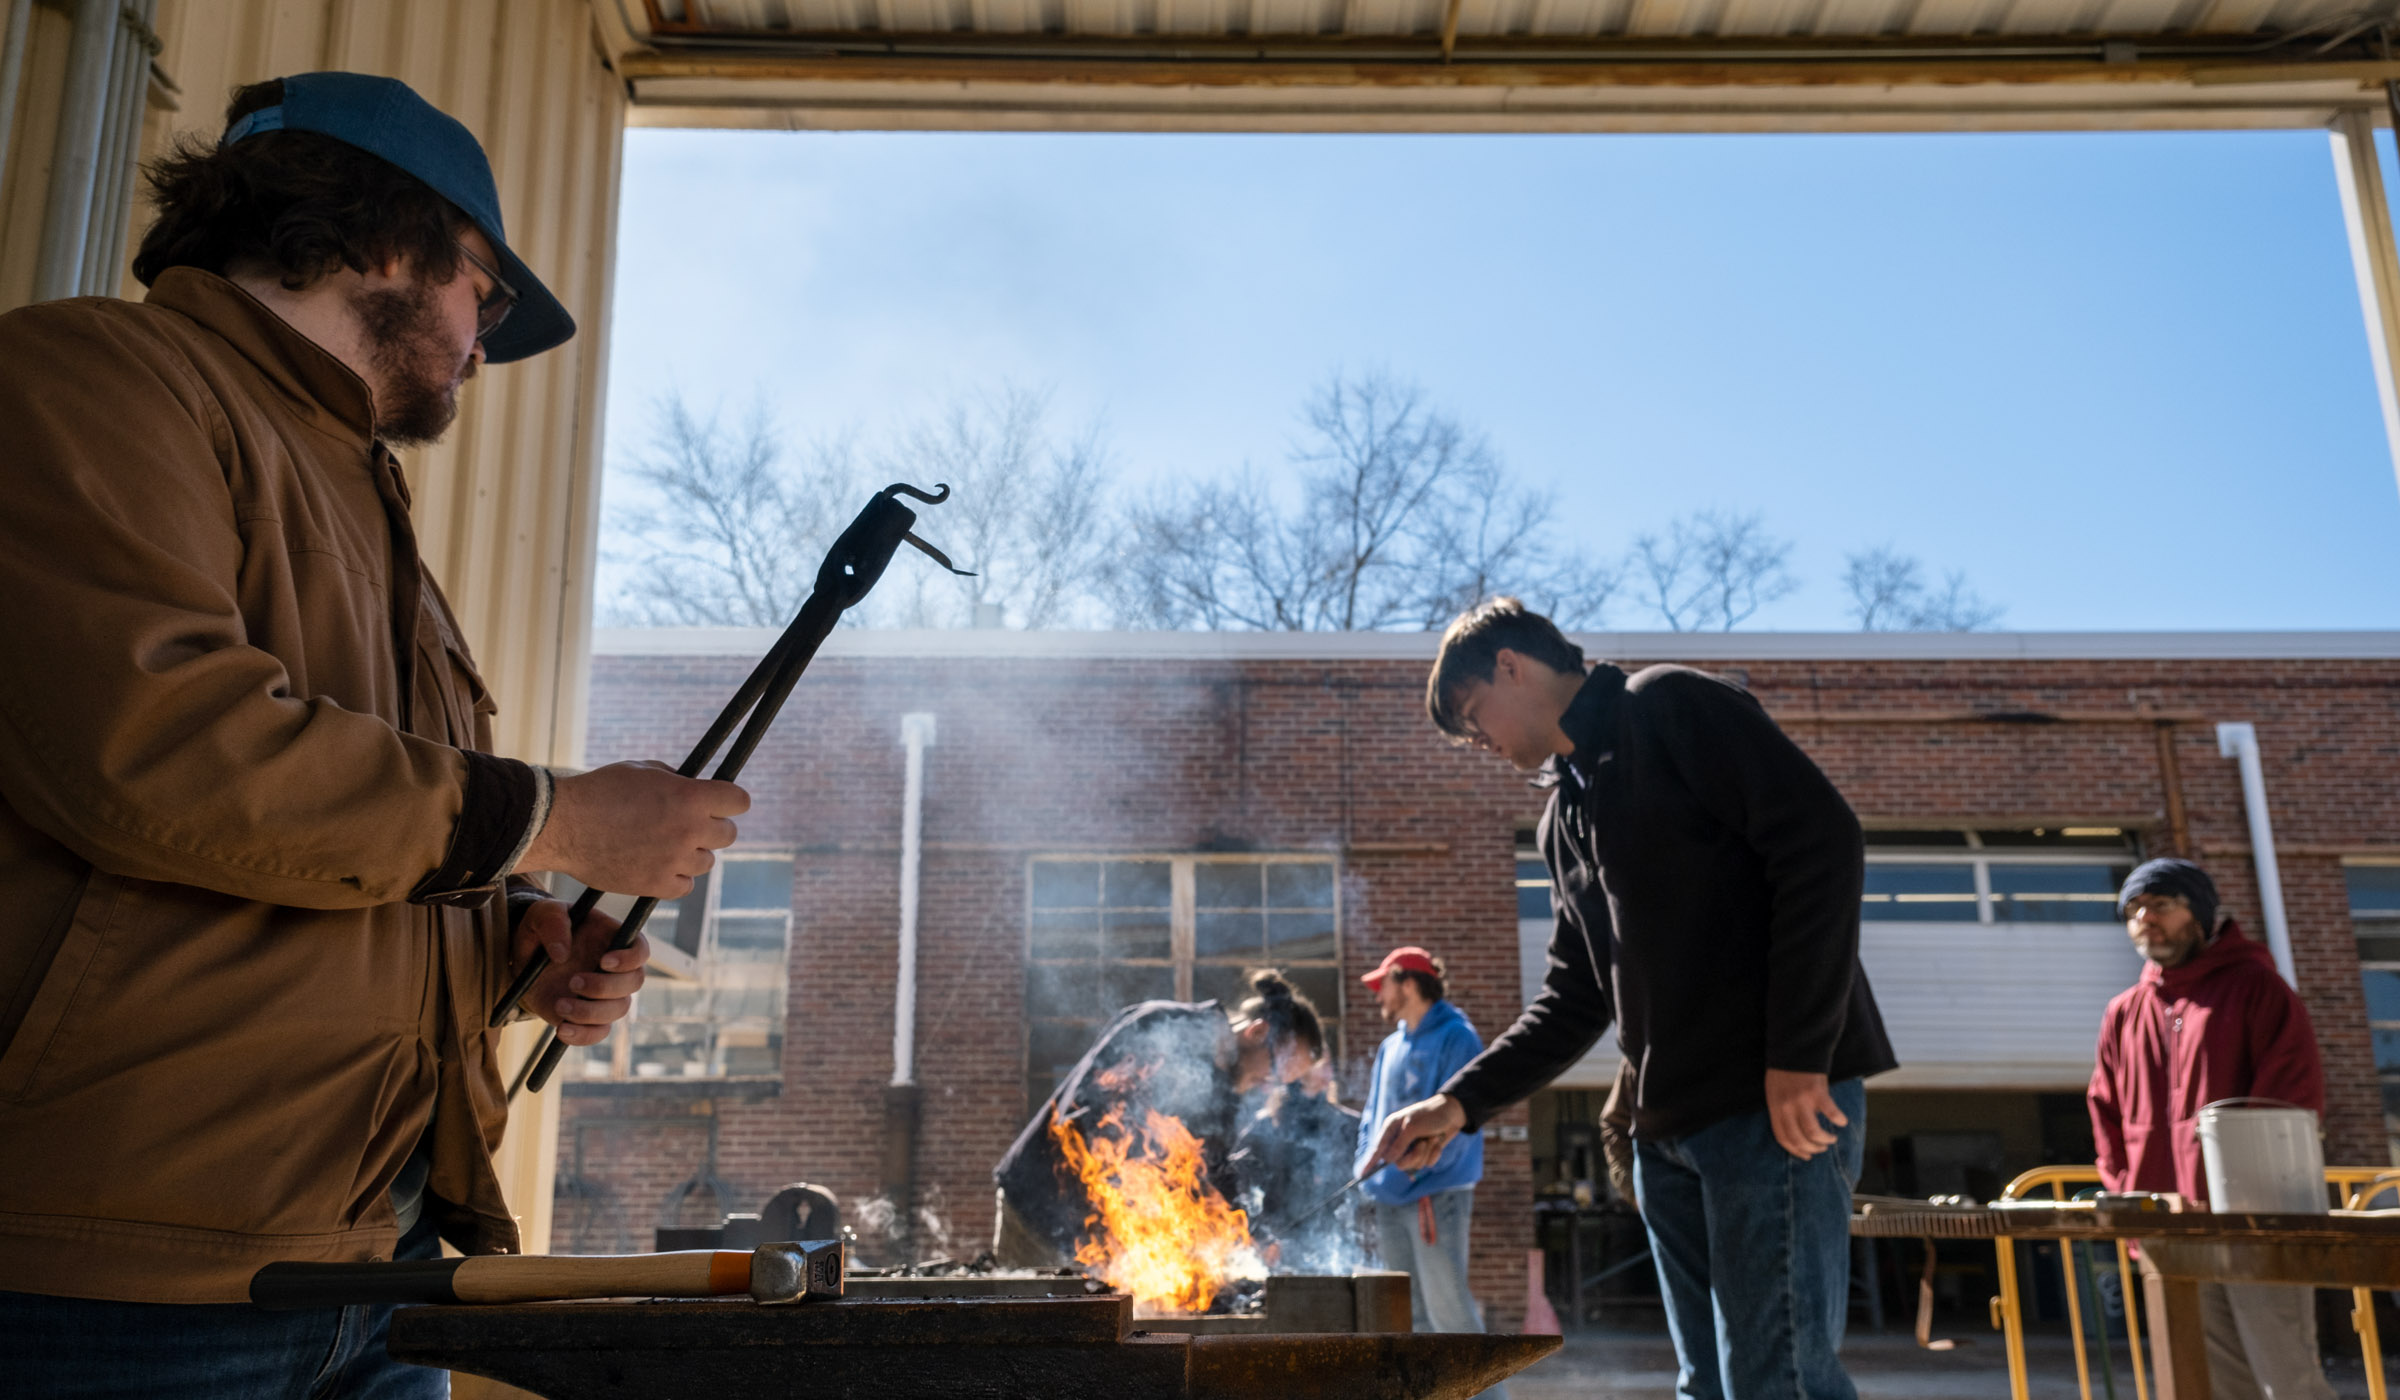 A workshop participant holds a completed iron hook up in the foreground while others work at the fire and a second anvil in the background, with blue sky beyond.